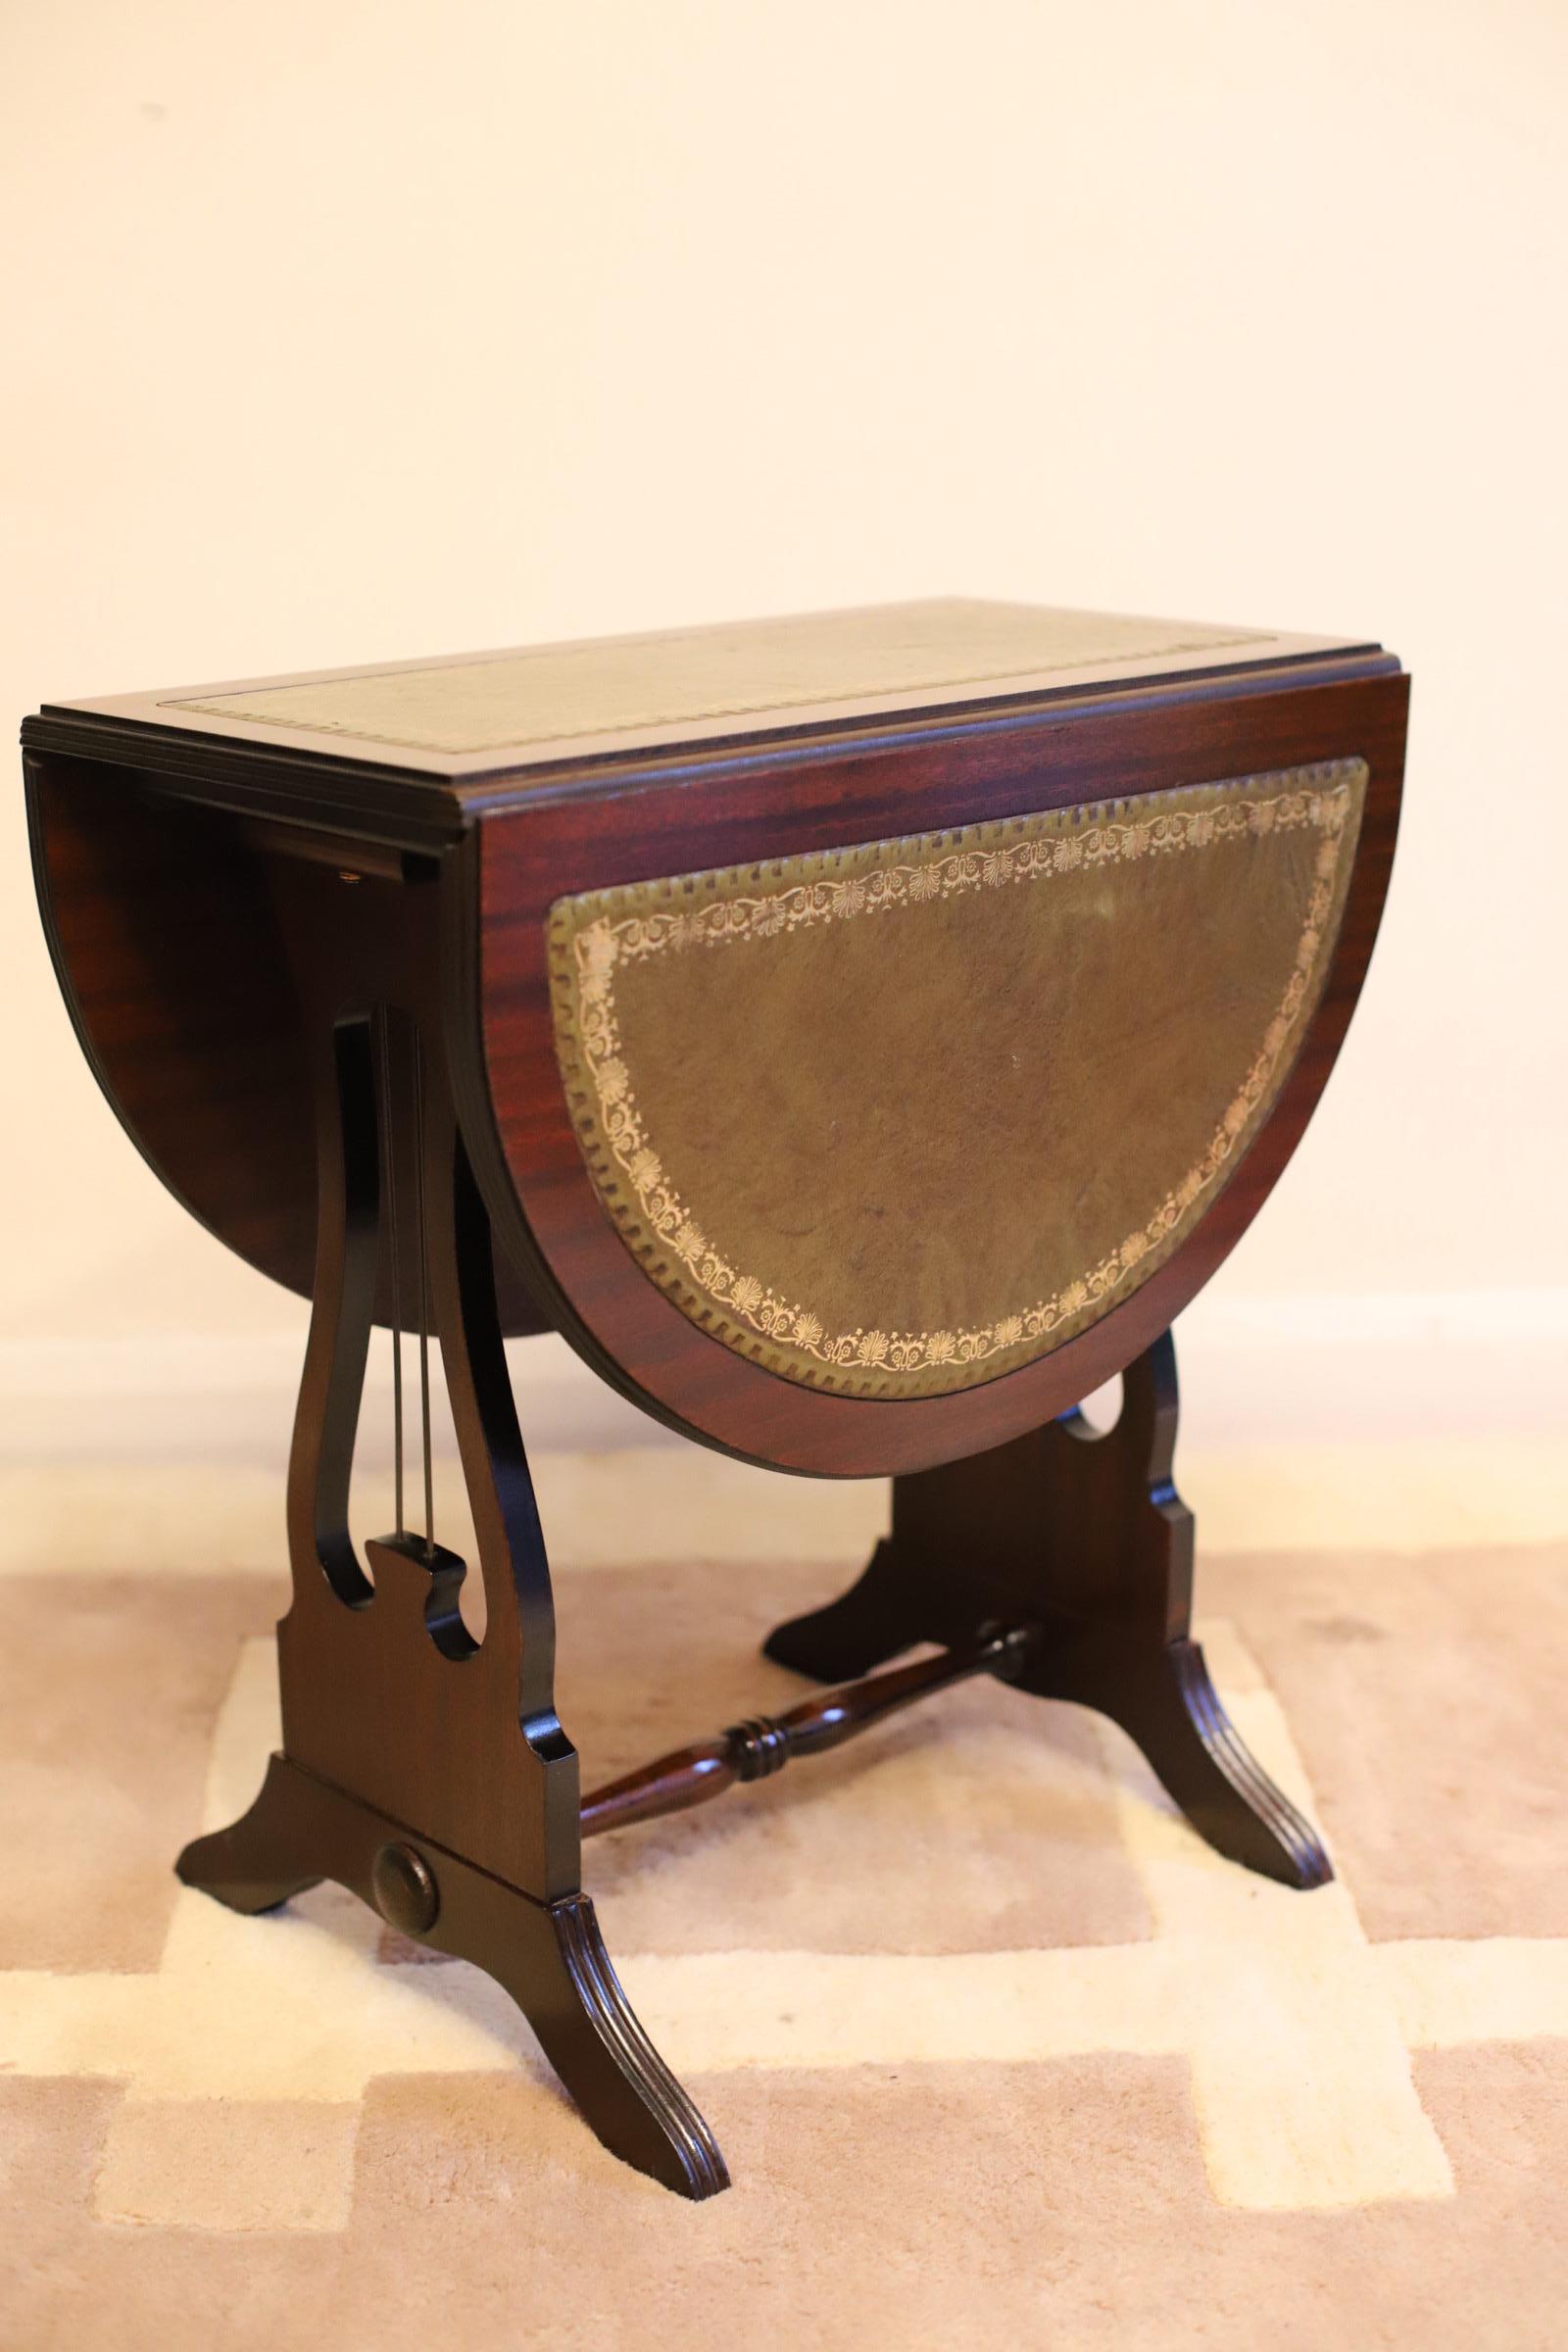 Edwardian Beautiful Oval Folding Caffe Table With Leather Top For Sale